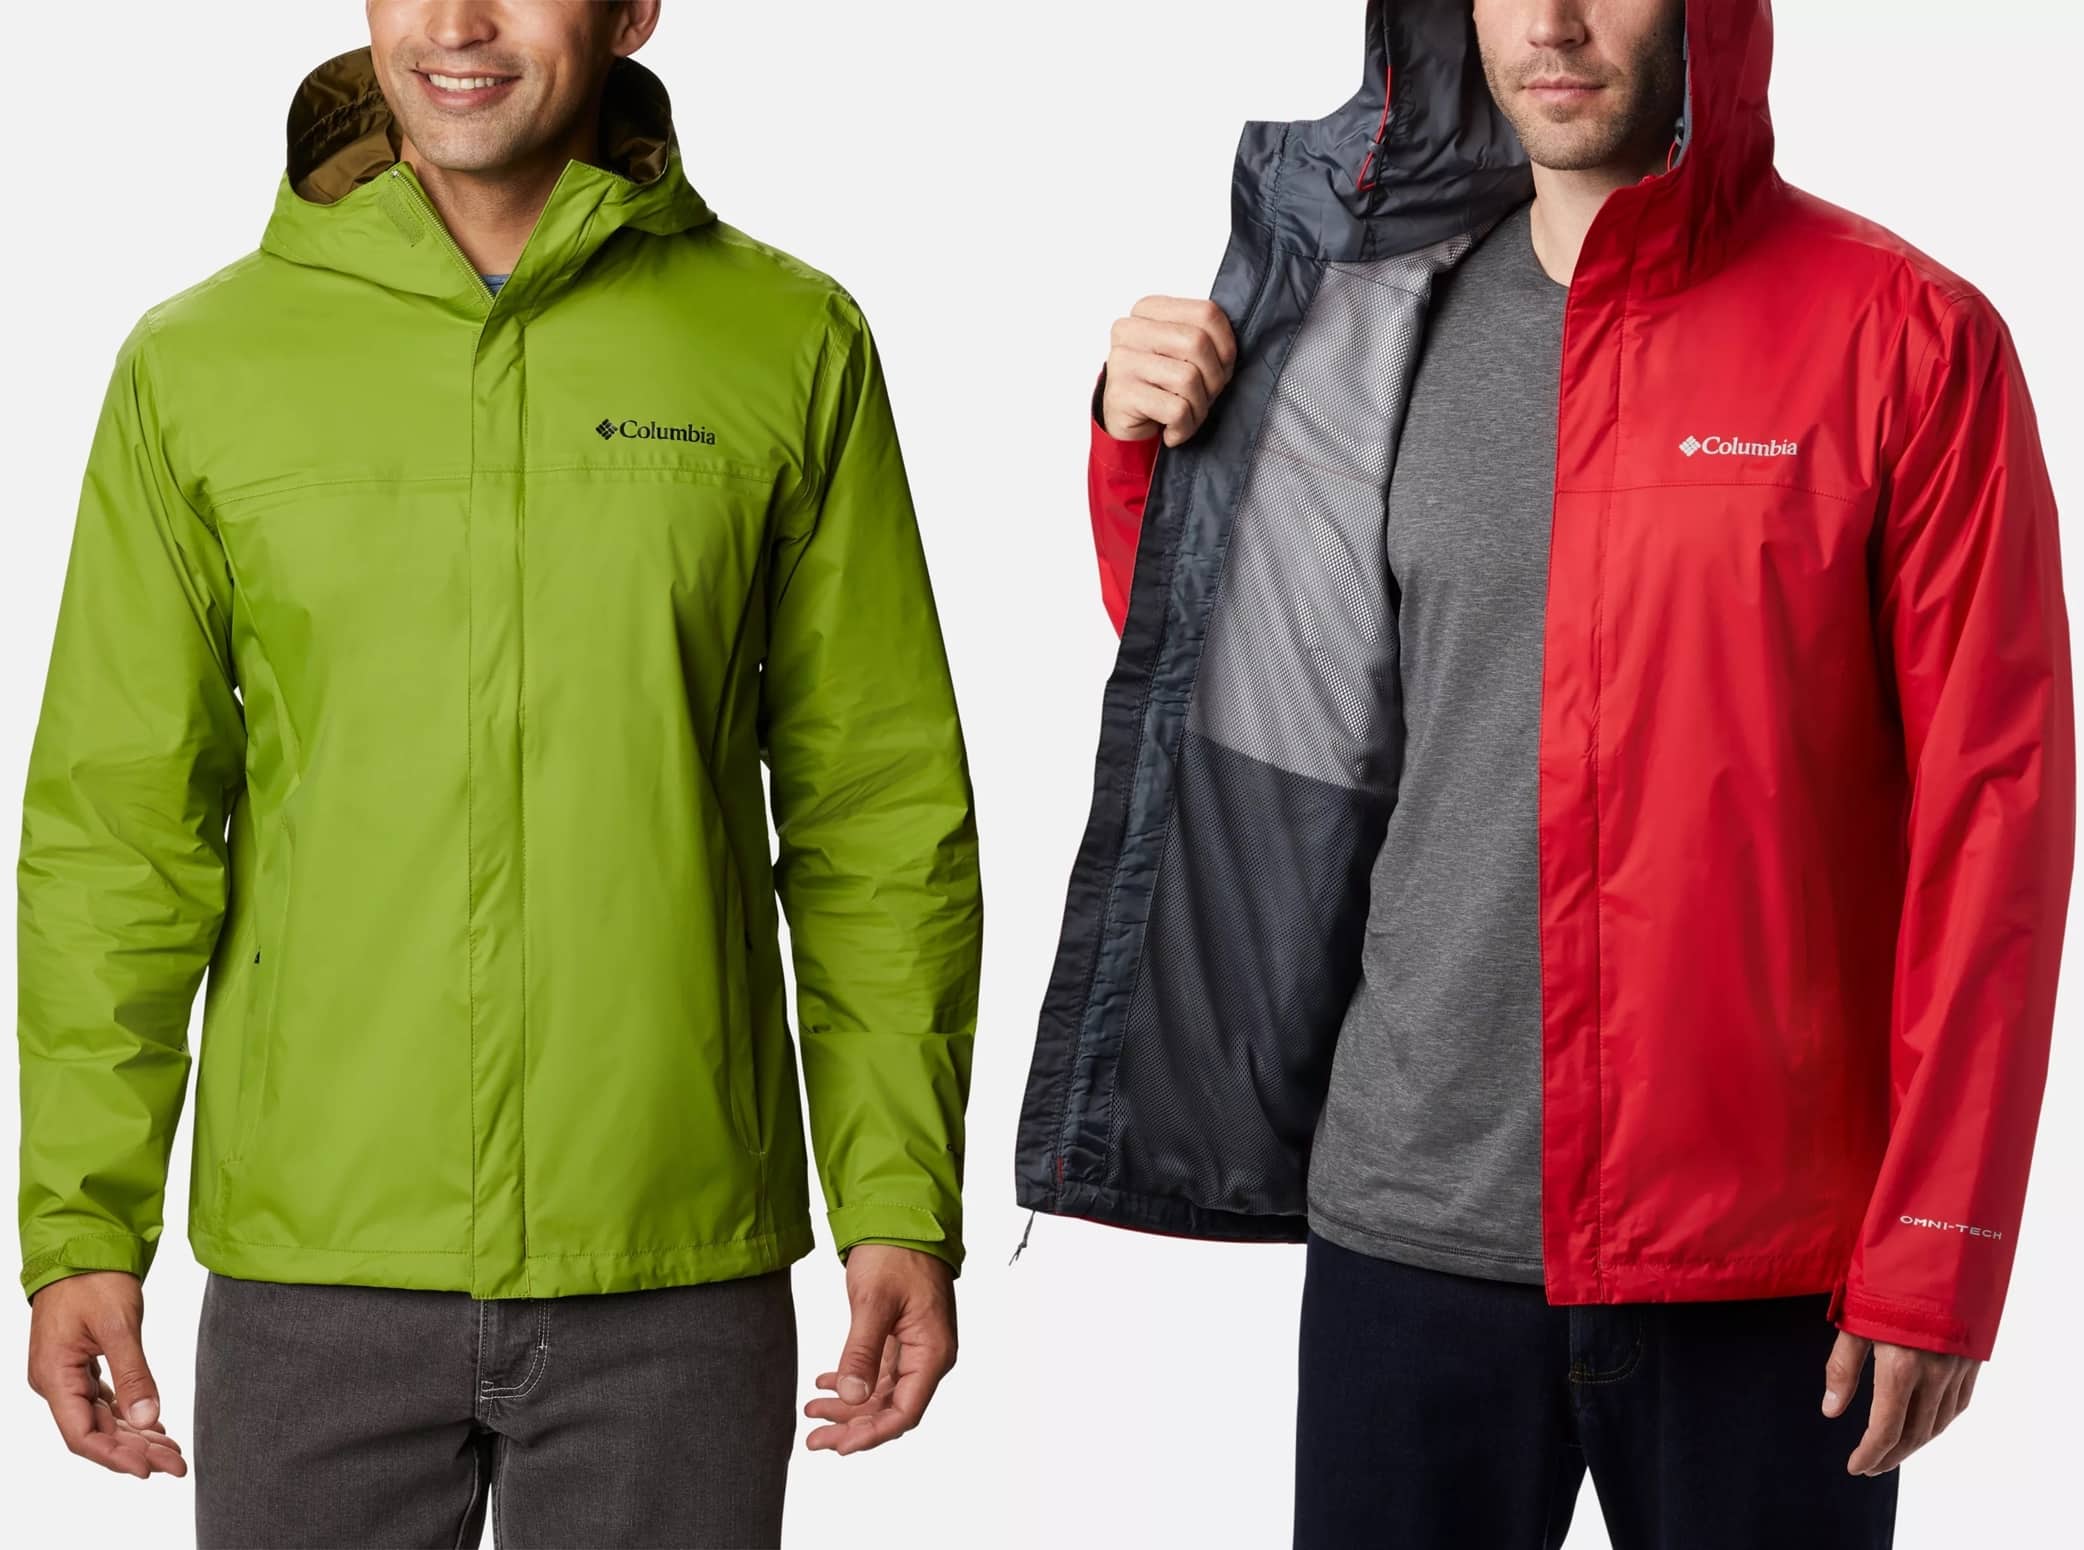 This waterproof-breathable, fully seam-sealed jacket will keep you nice and dry, even in the heaviest of rains